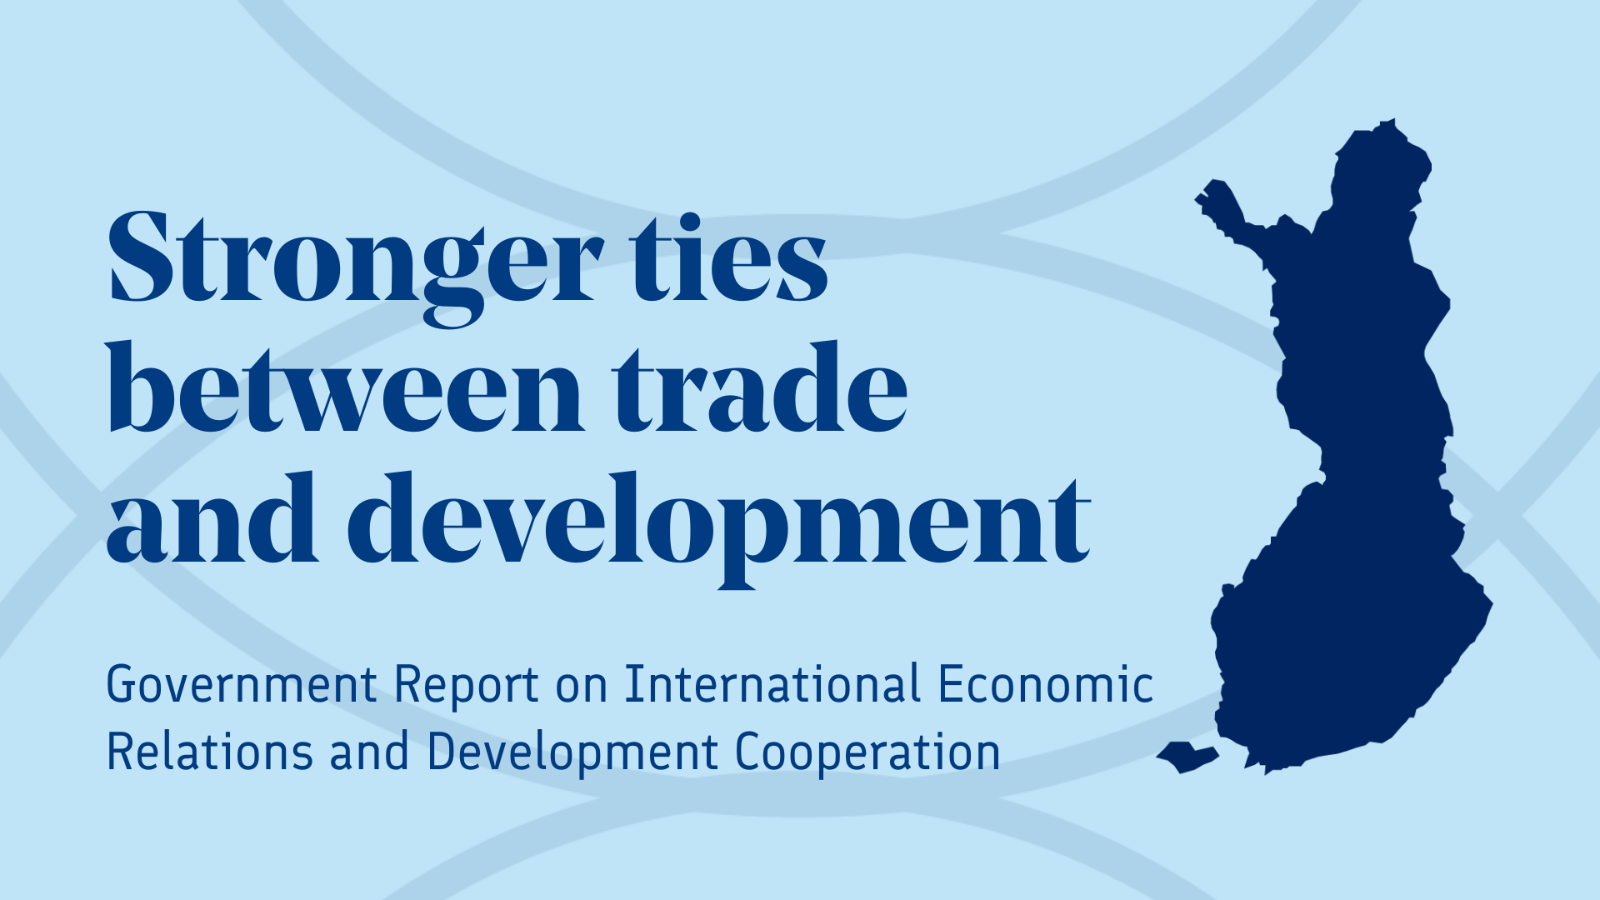 Stronger ties between trade and development. Government report on International Economic Relations and Development Coordination.